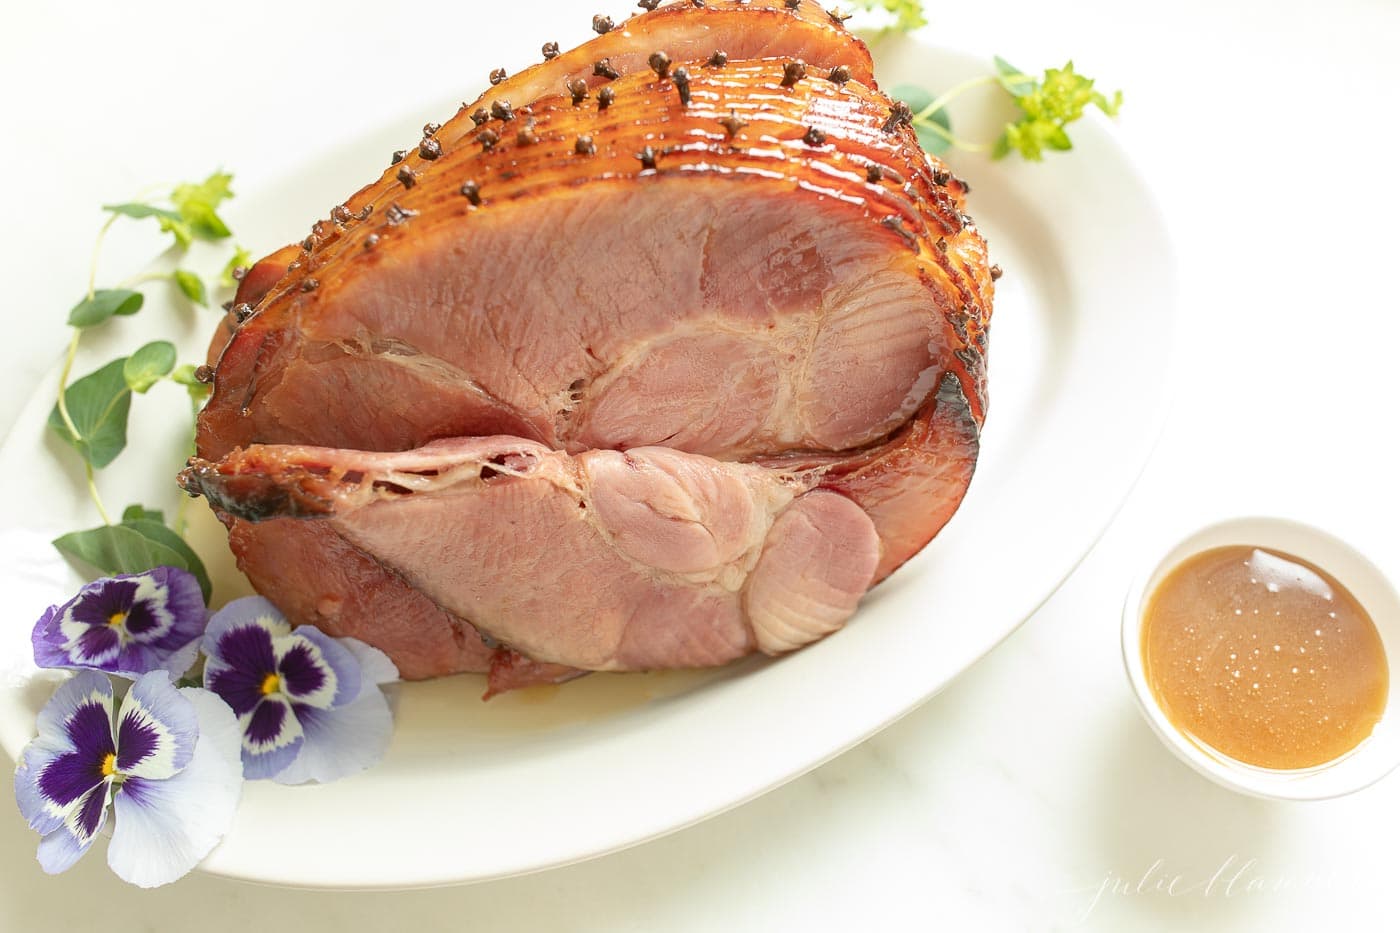 A sliced honey baked ham garnished with fresh flowers and cloves dotted throughout crust.